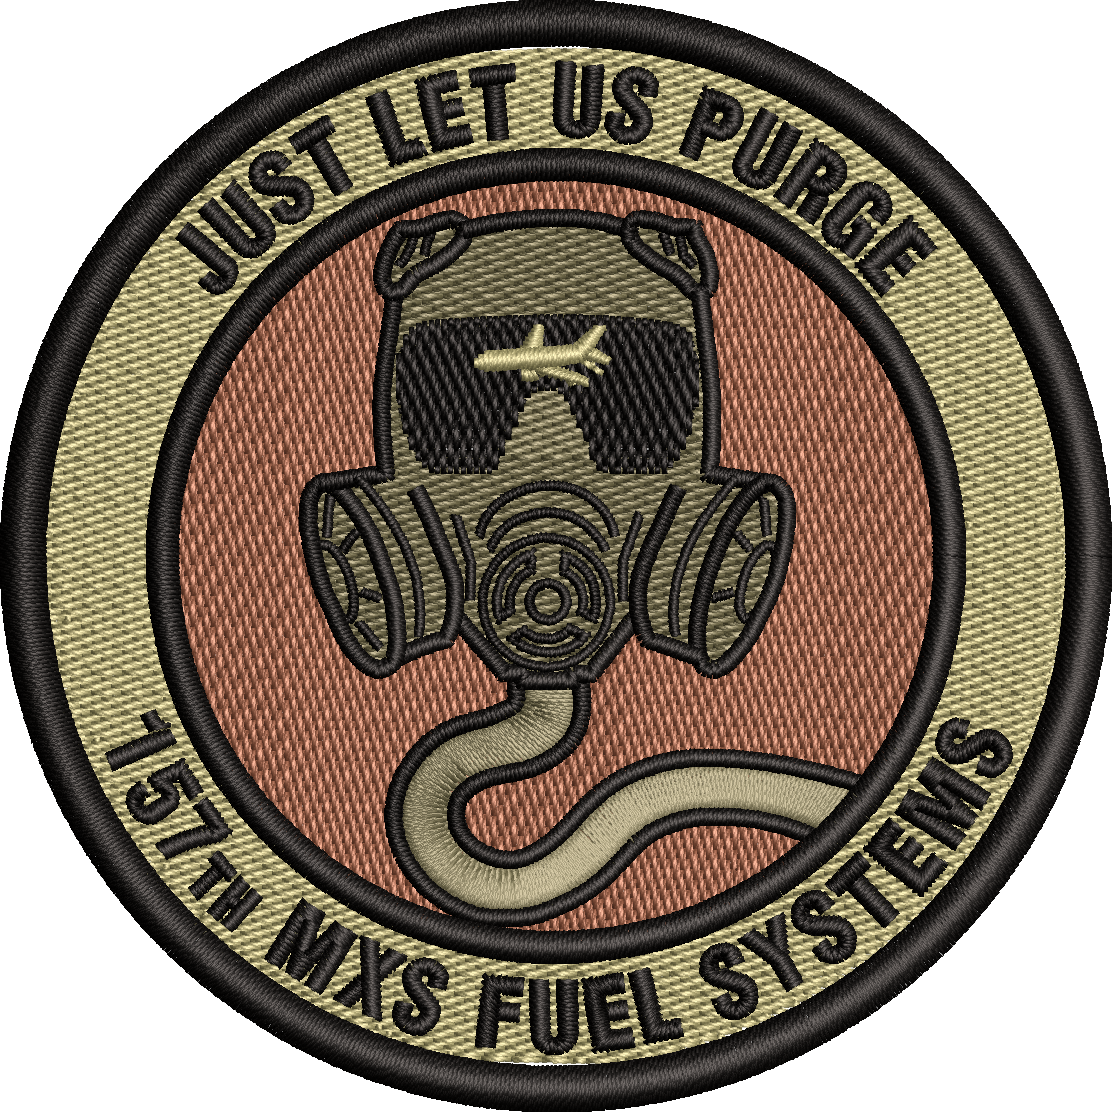 157th MXS Fuel Systems - 'Just Let Us Purge'